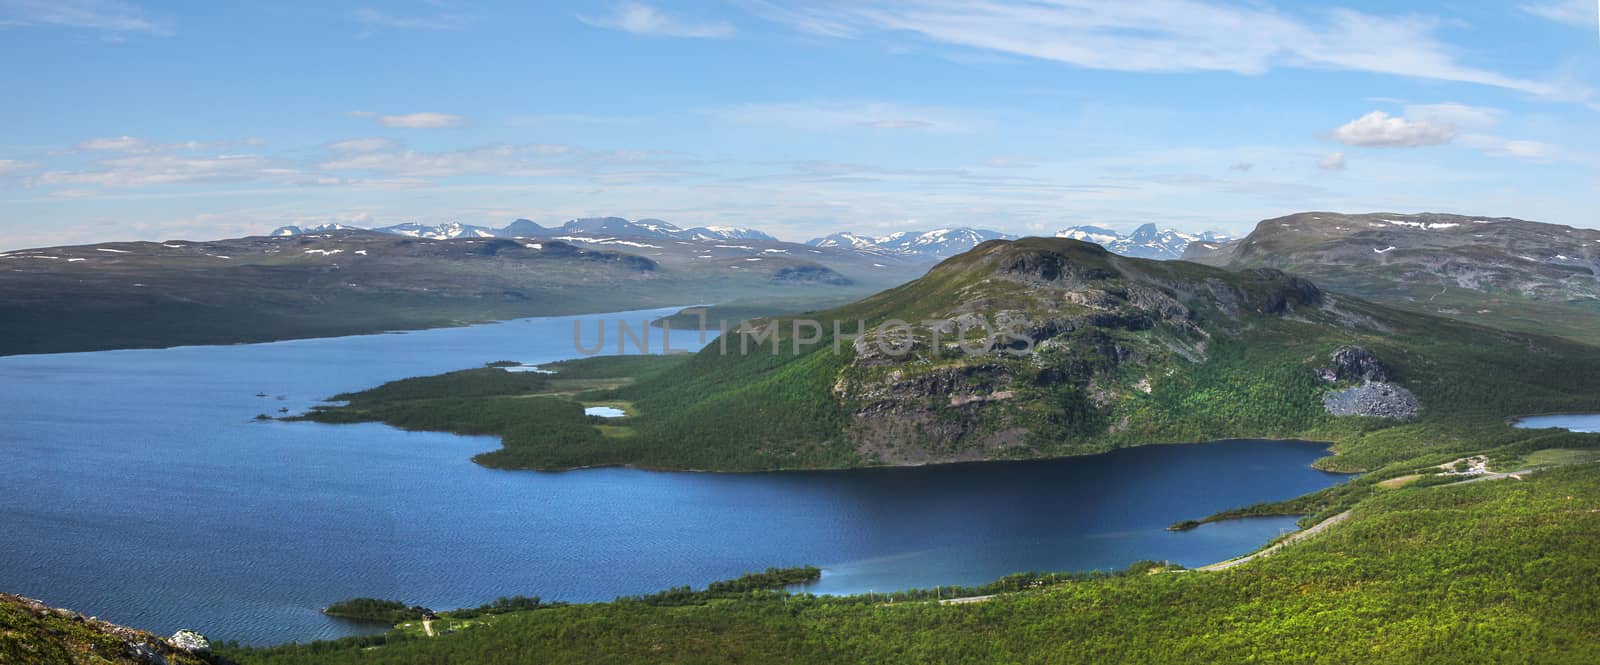 Panoramic view of Lake Kilpisjarvi and Malla fells, seen from Saanatunturi fell to North. Snowy mountain tops are in Sweden and Norway.